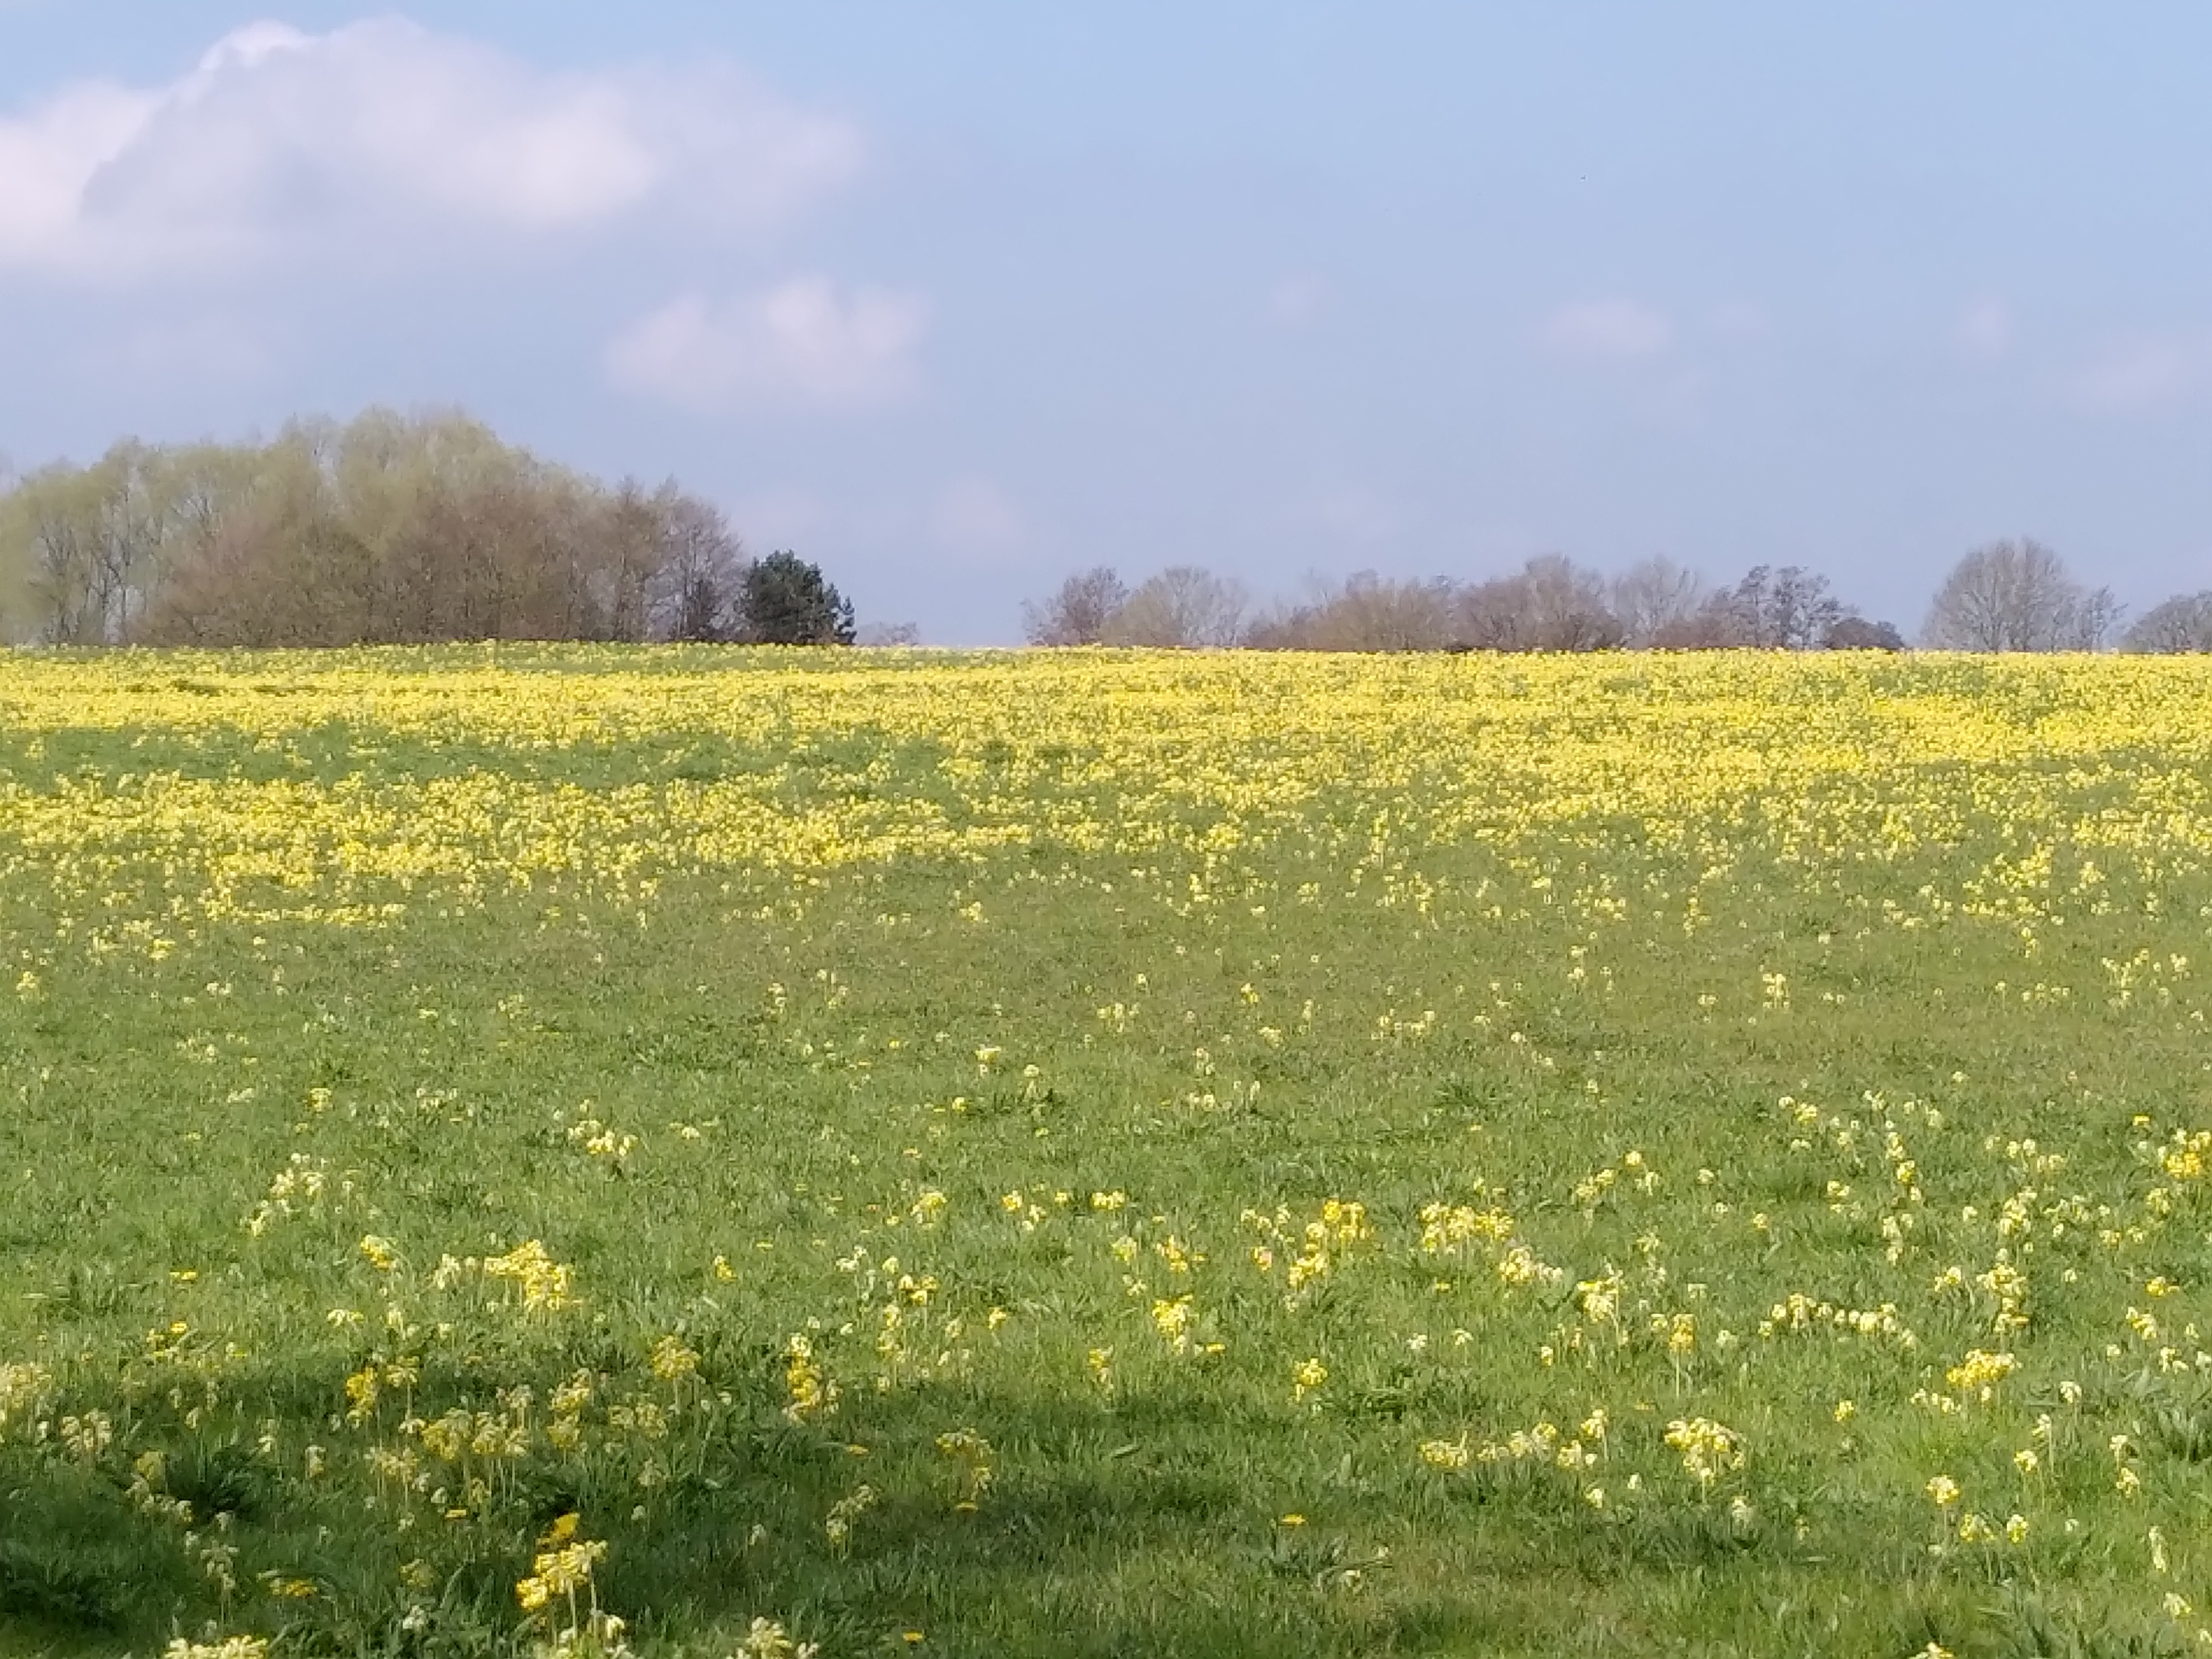 Swathes of Cowslips